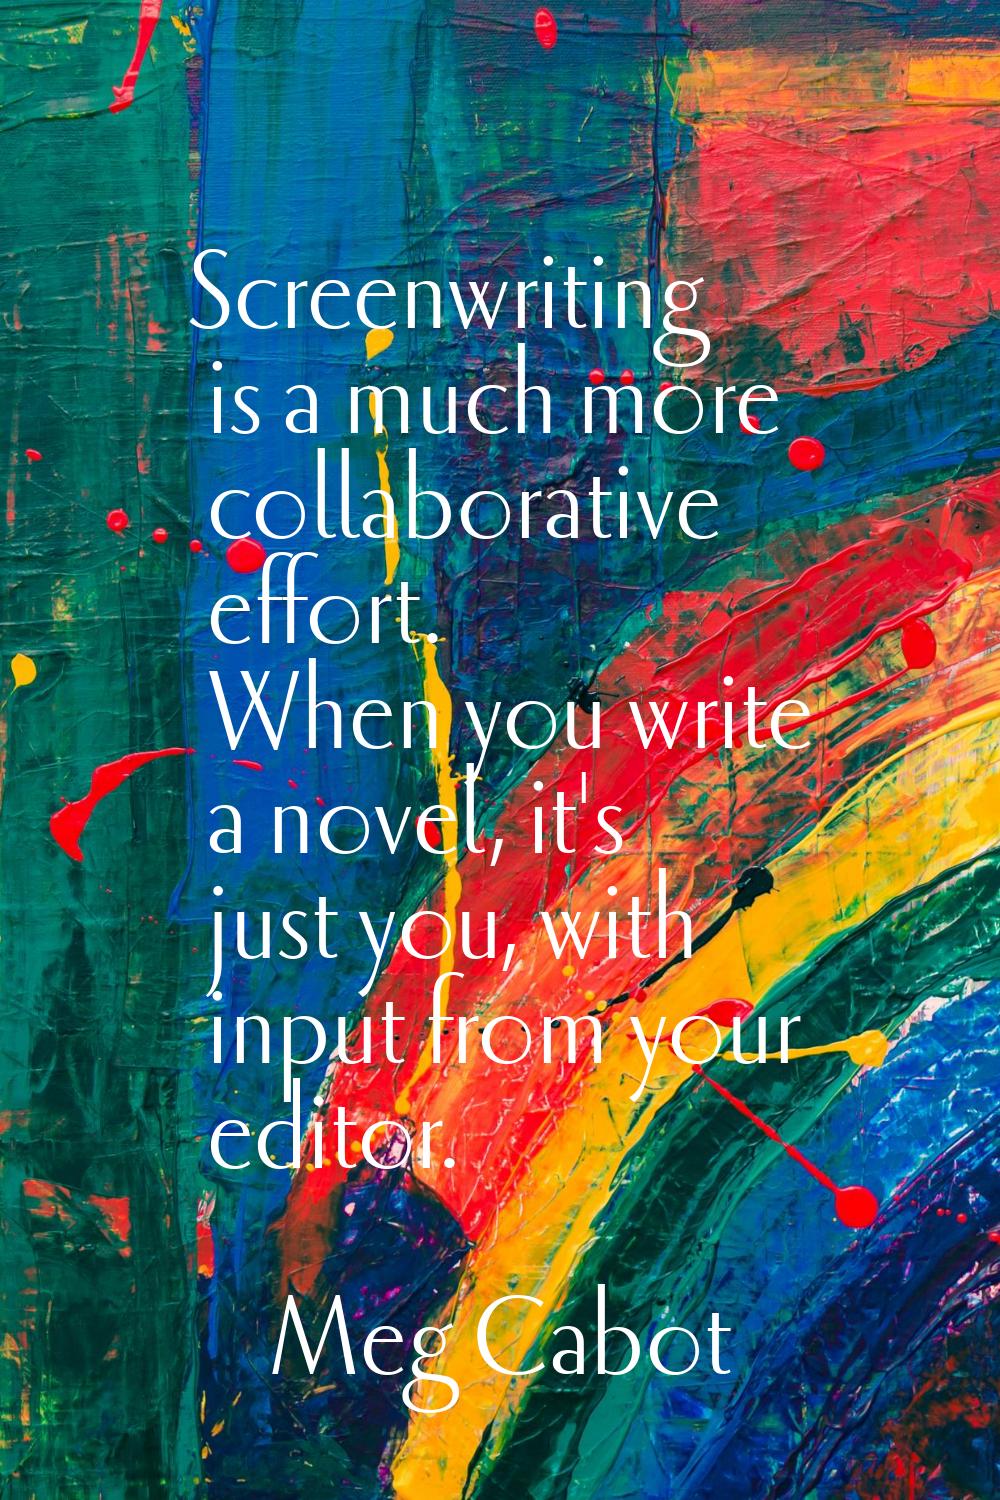 Screenwriting is a much more collaborative effort. When you write a novel, it's just you, with inpu